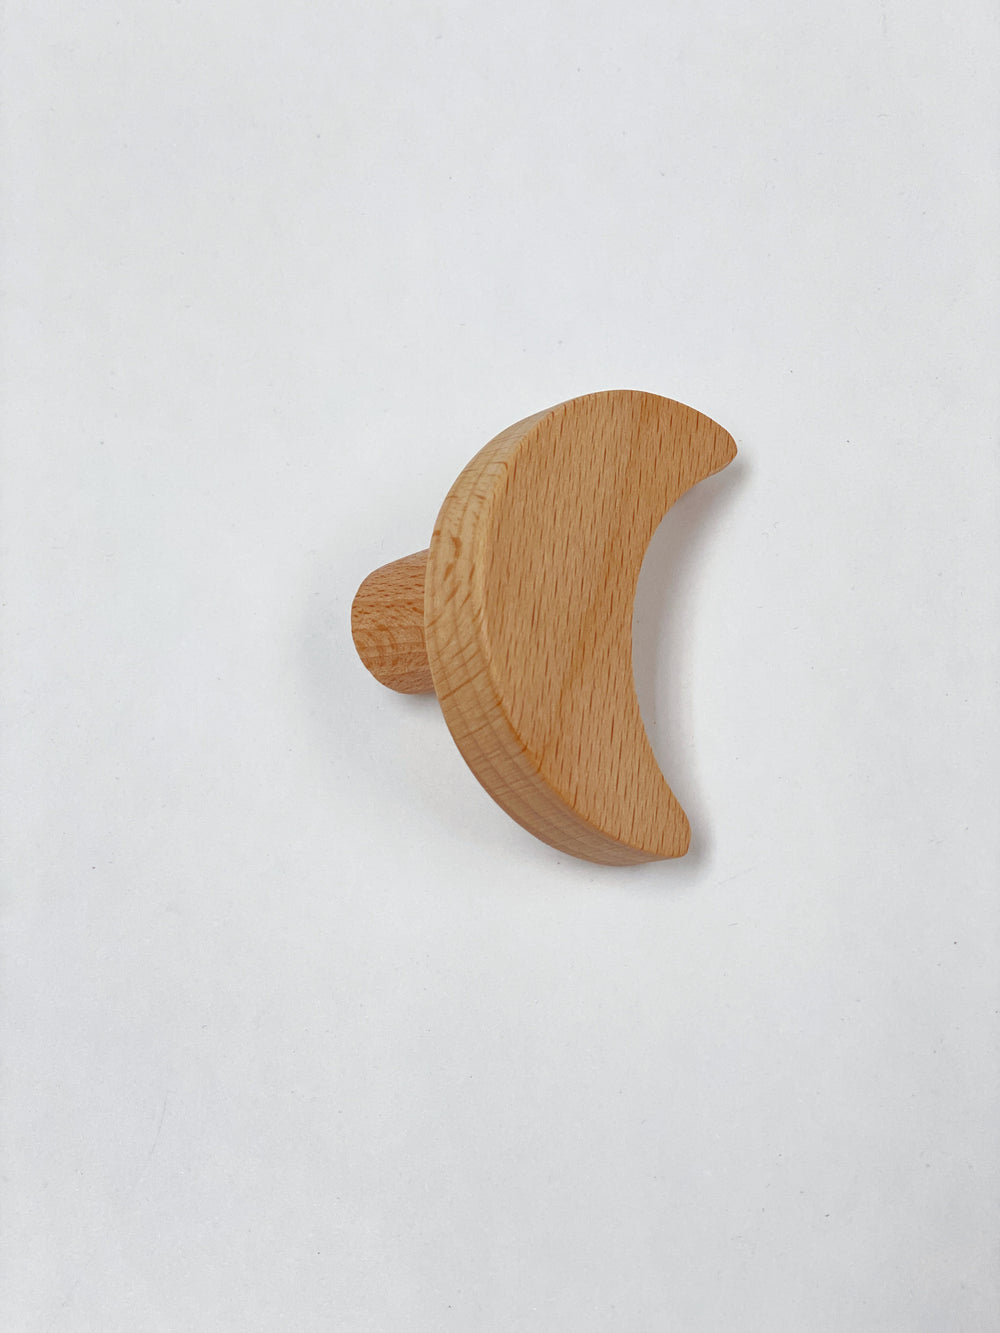 Wooden "Moon" Cabinet Knob - Purdy Hardware - Knobs